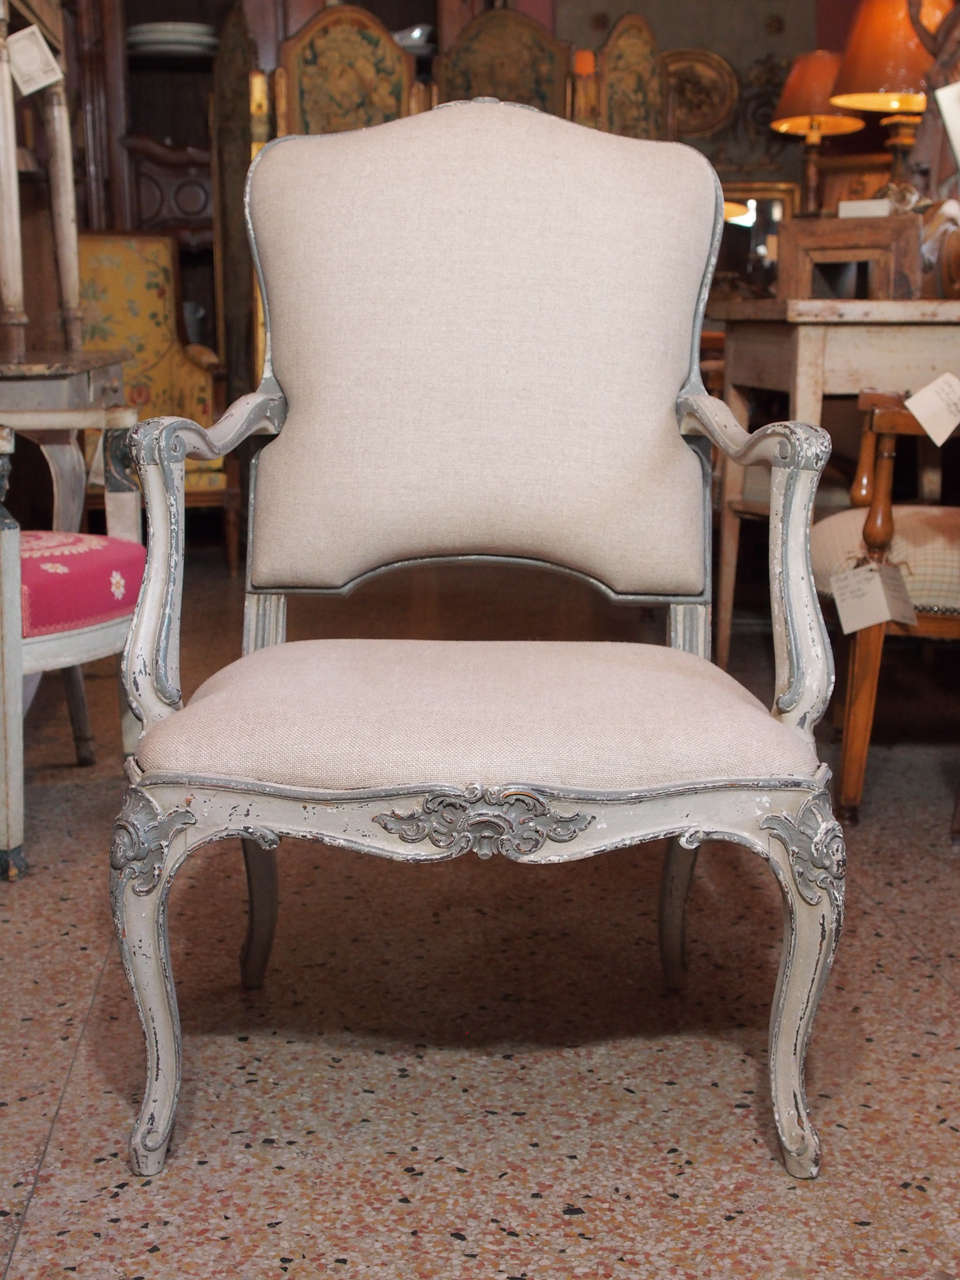 Louis XV style painted and carved armchairs in gray or blue shades.
Shaped and carved apron and cabriole legs.